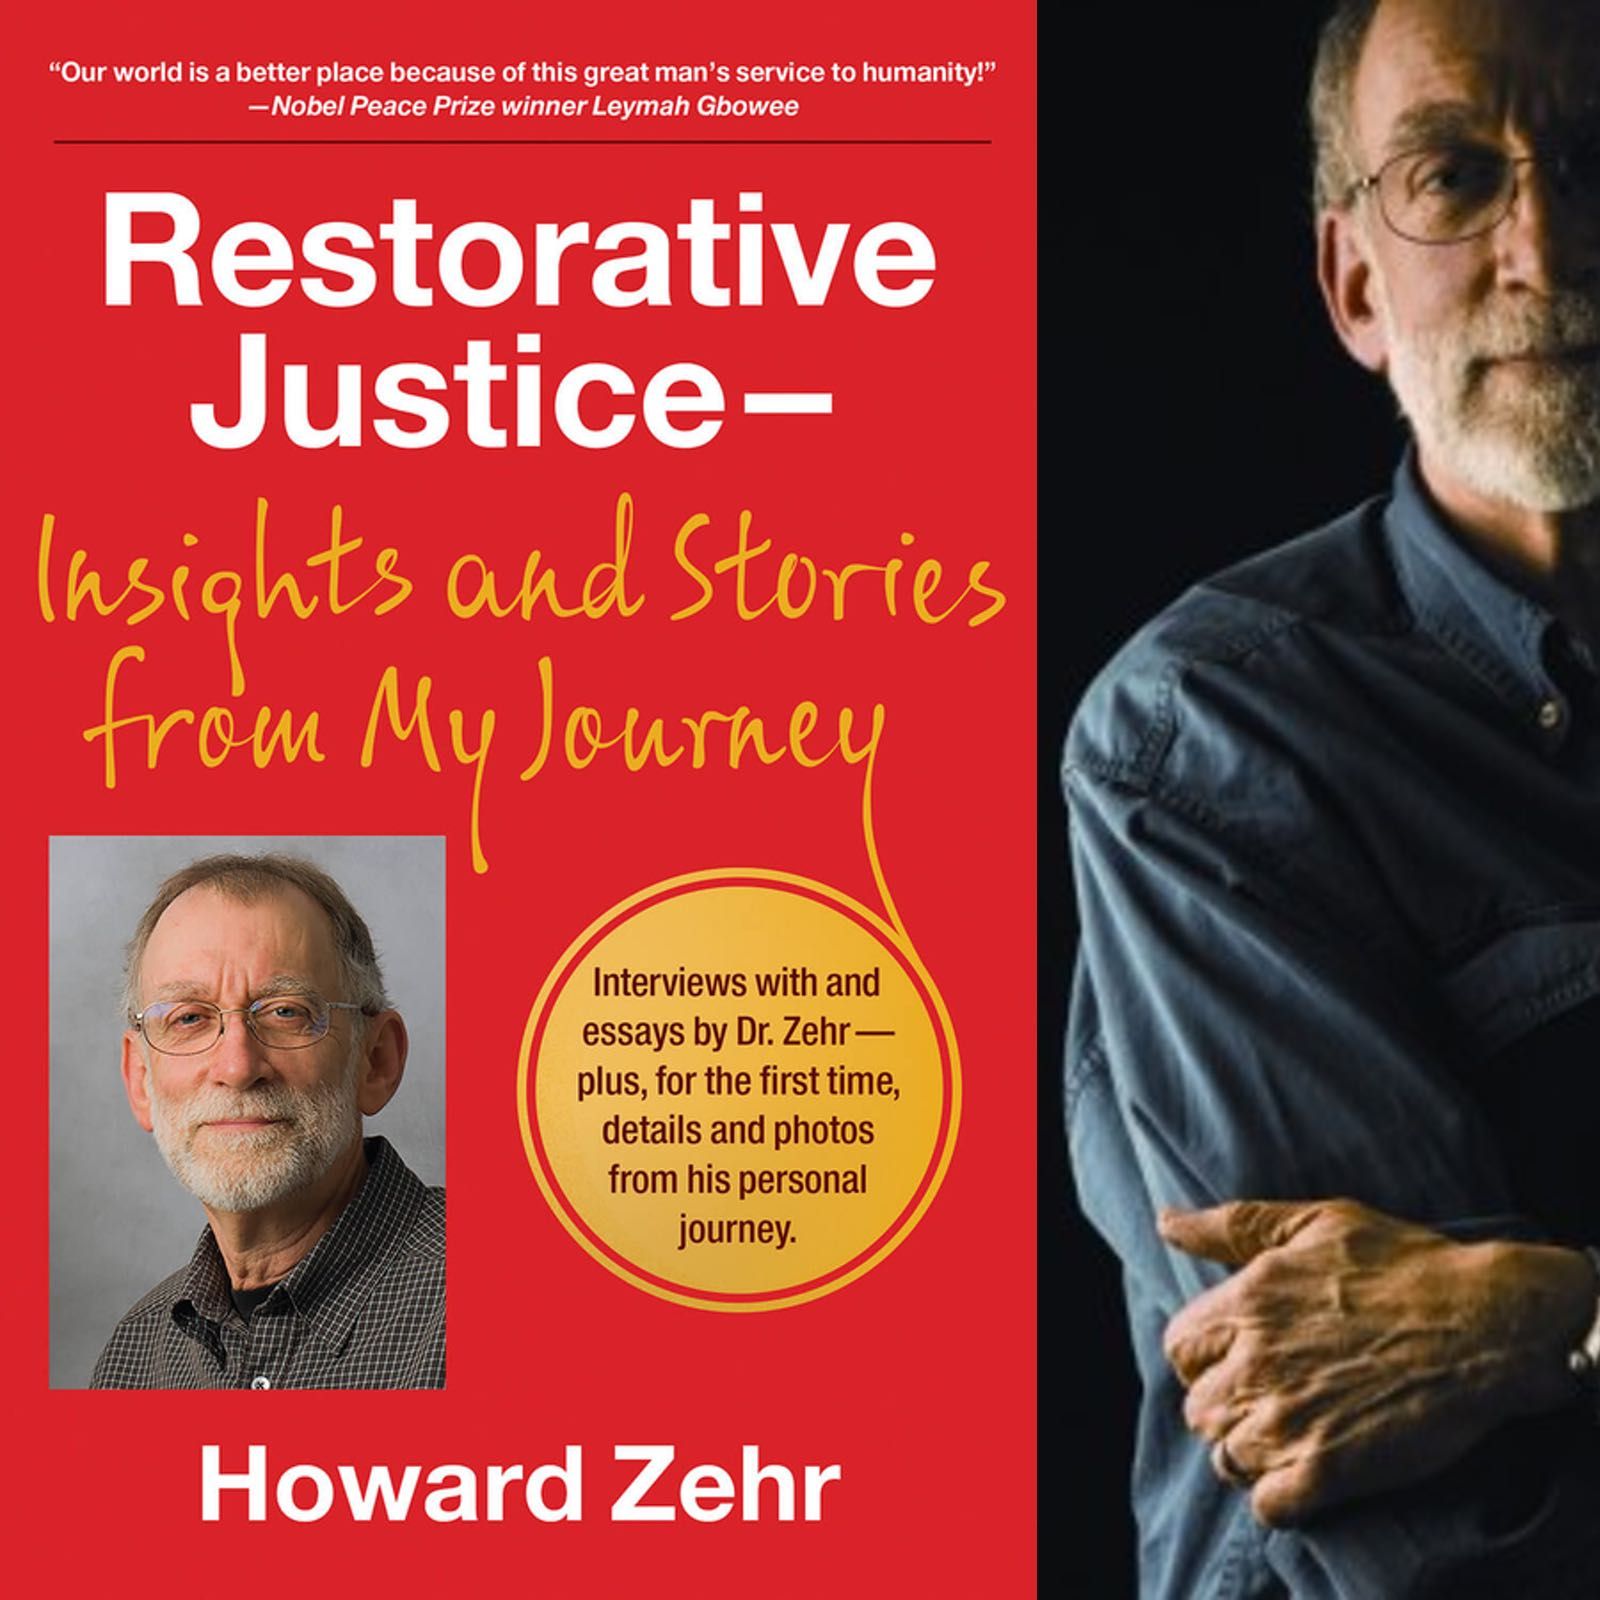 A Conversation With Howard Zehr Celebrating his new book